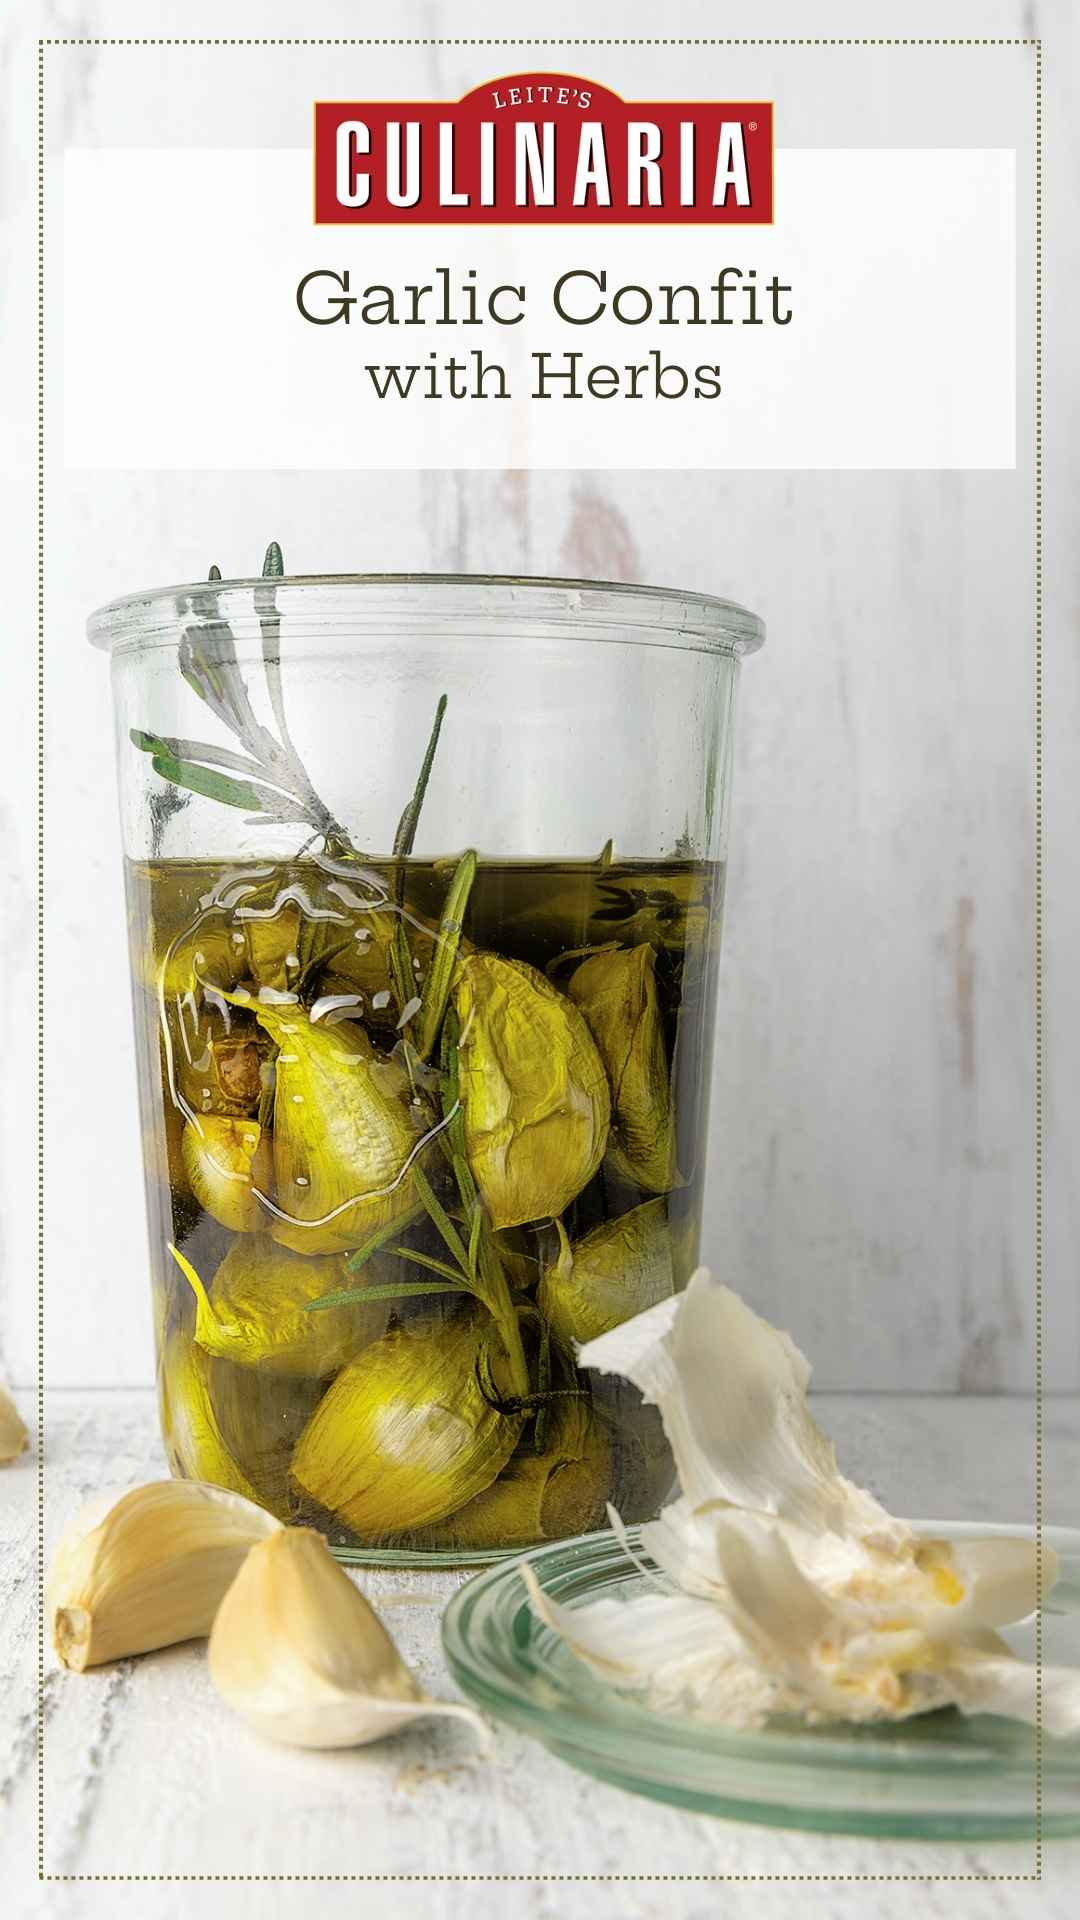 A jar of garlic confit with loose garlic cloves and husks nearby.